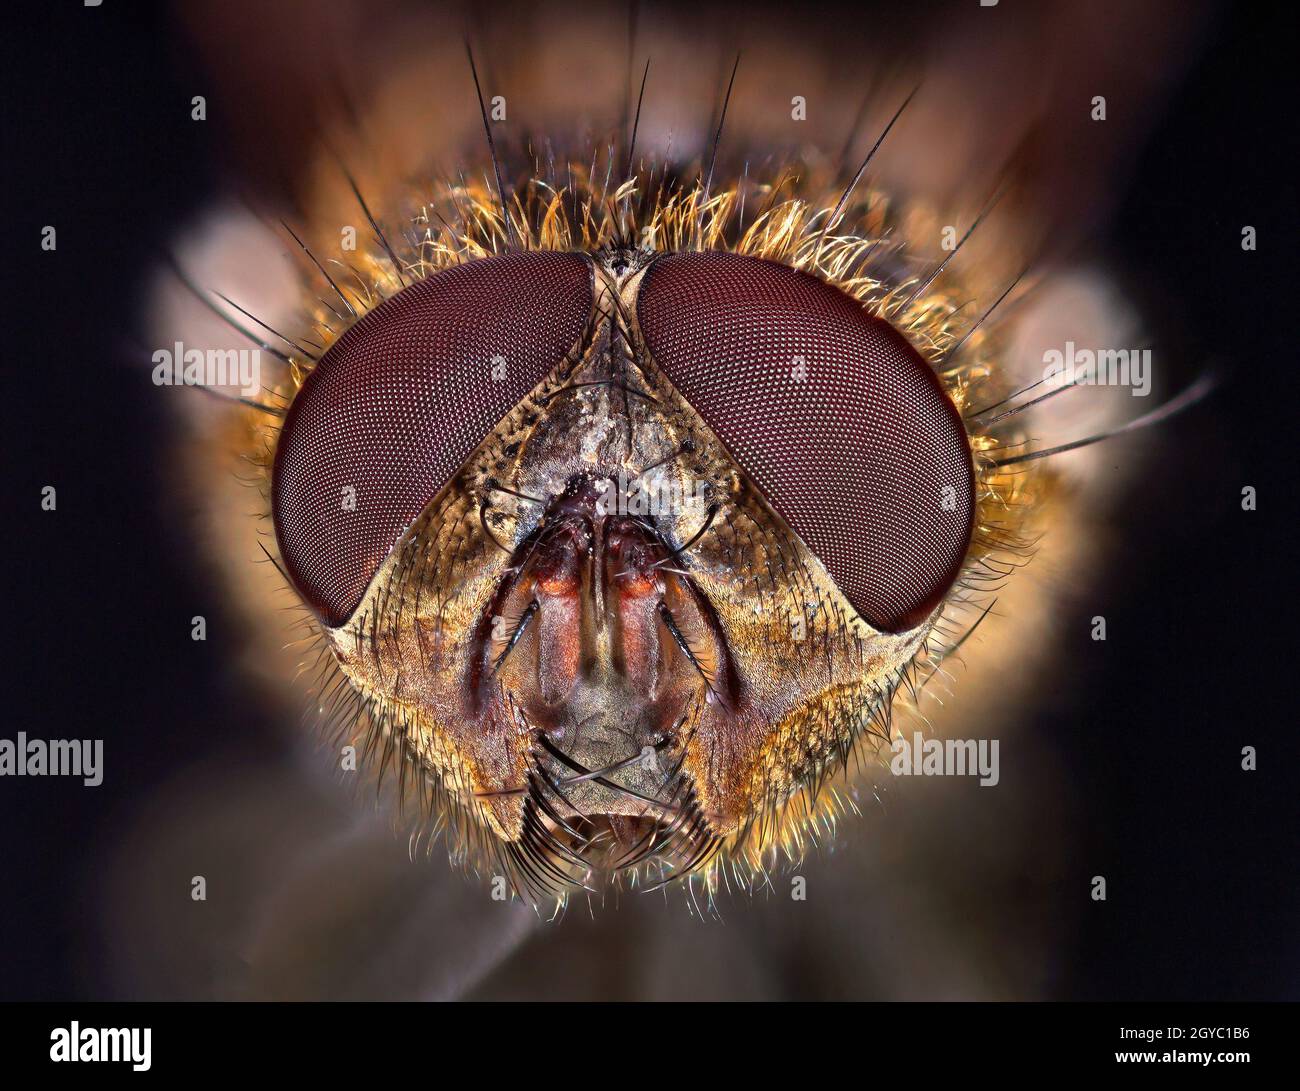 Fly head macro close-up showing compound eyes, mouthparts Stock Photo